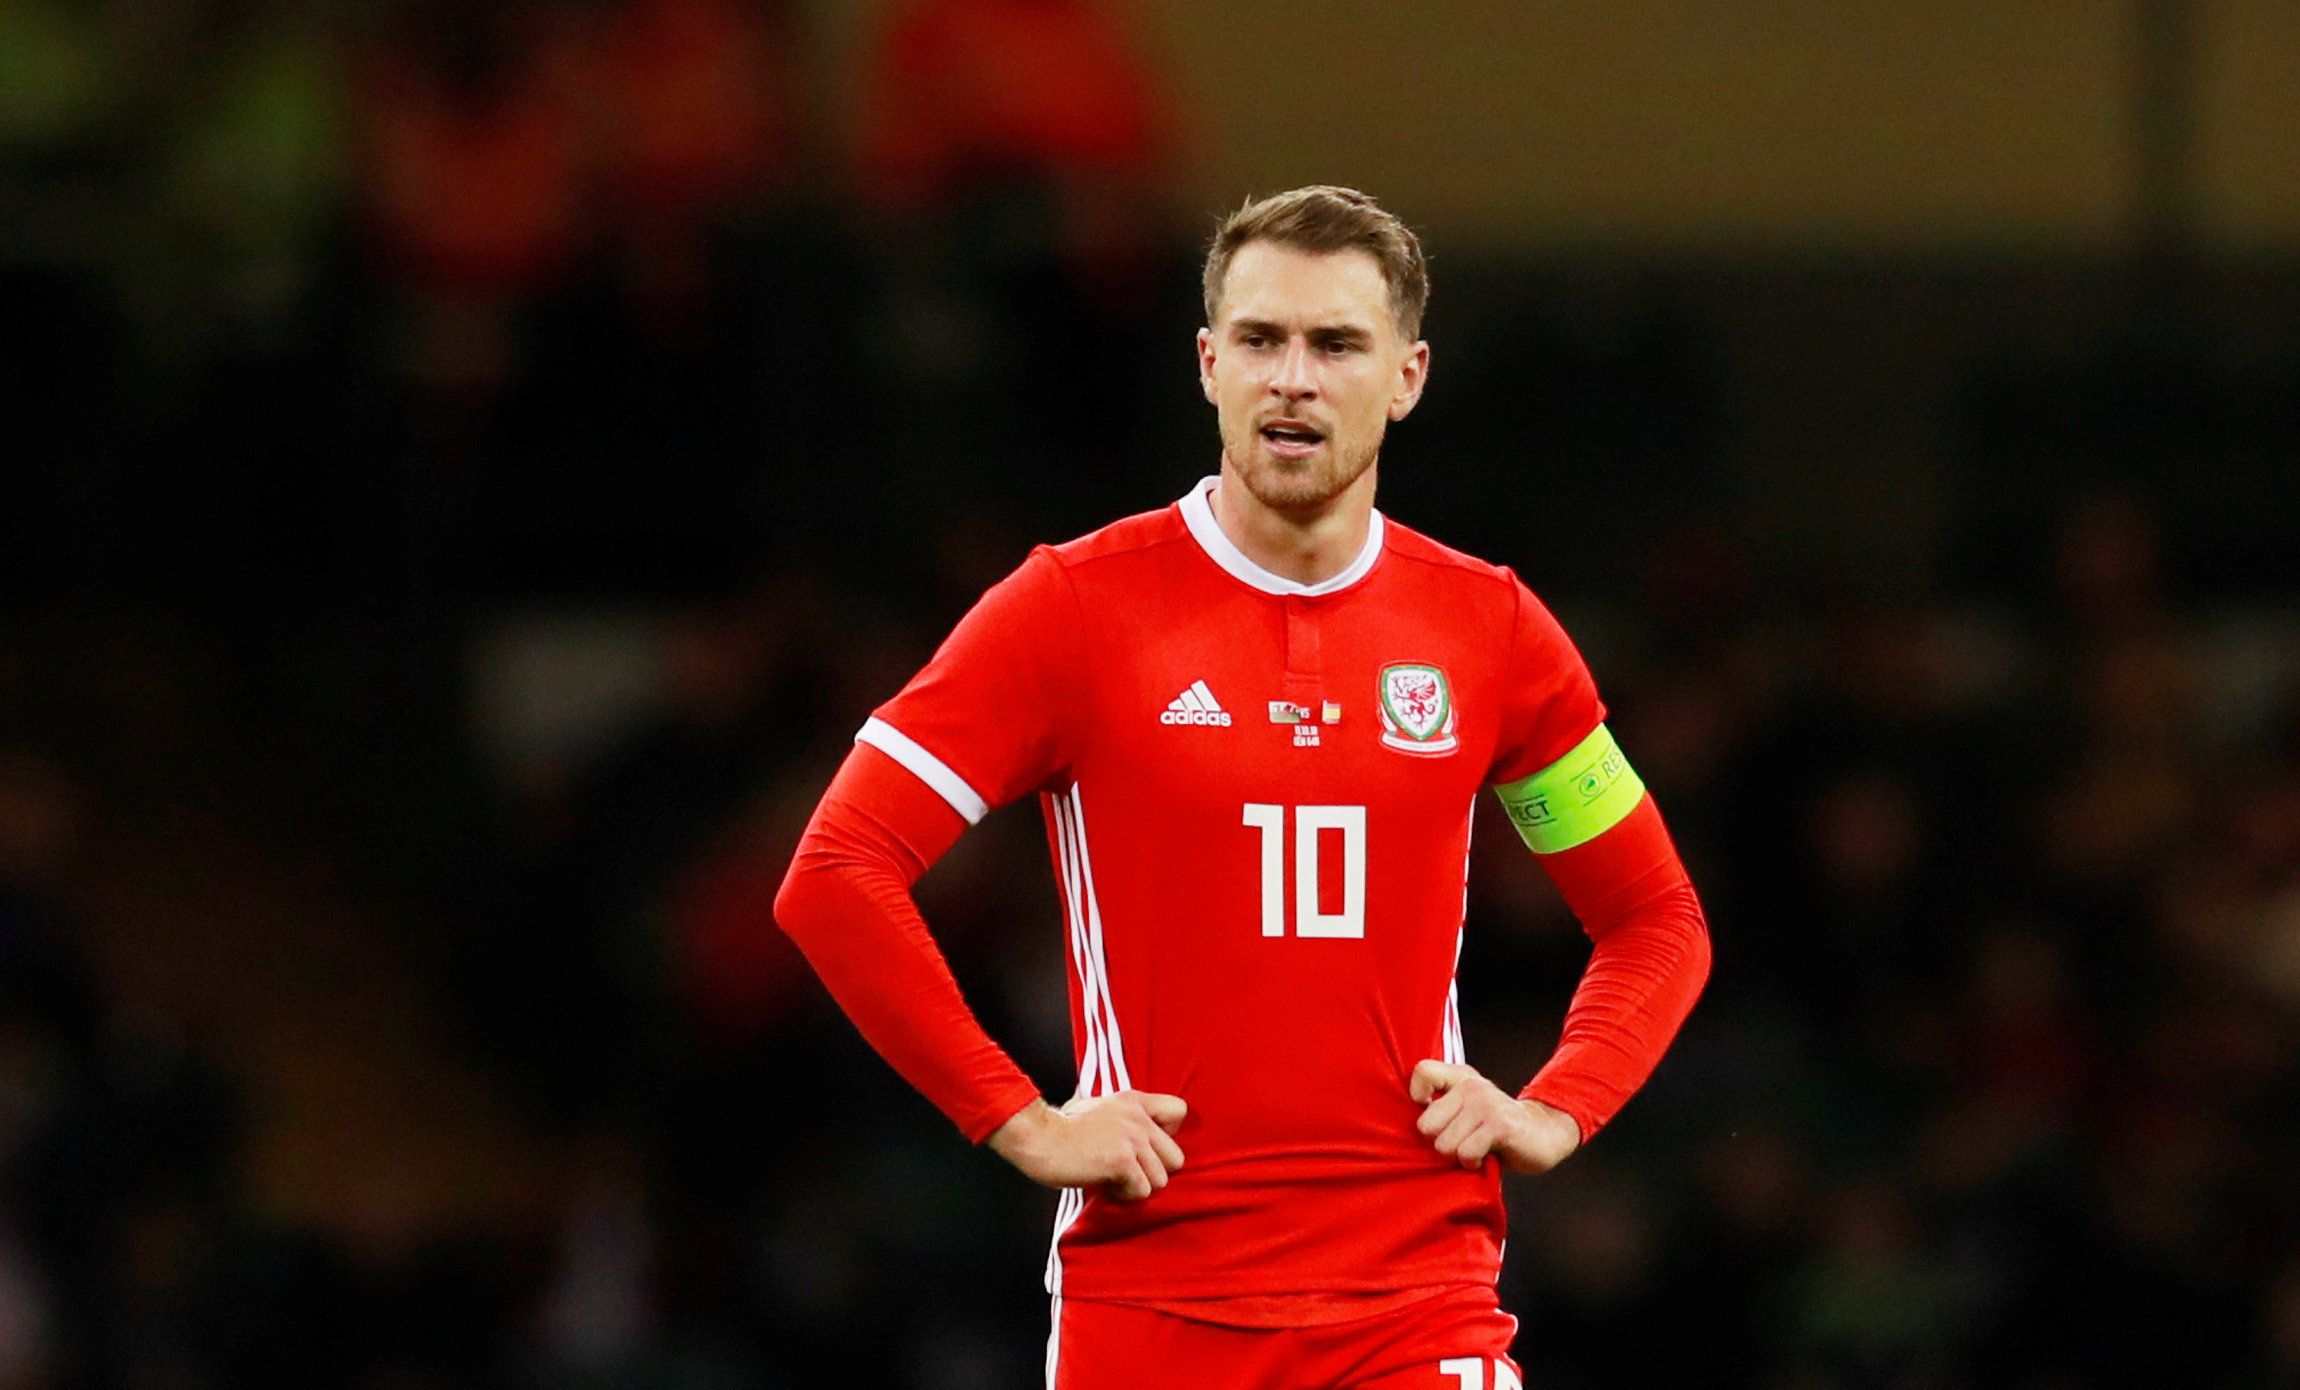 Soccer Football - International Friendly - Wales v Spain - Principality Stadium, Cardiff, Britain - October 11, 2018  Wales' Aaron Ramsey looks dejected   Action Images via Reuters/Andrew Couldridge